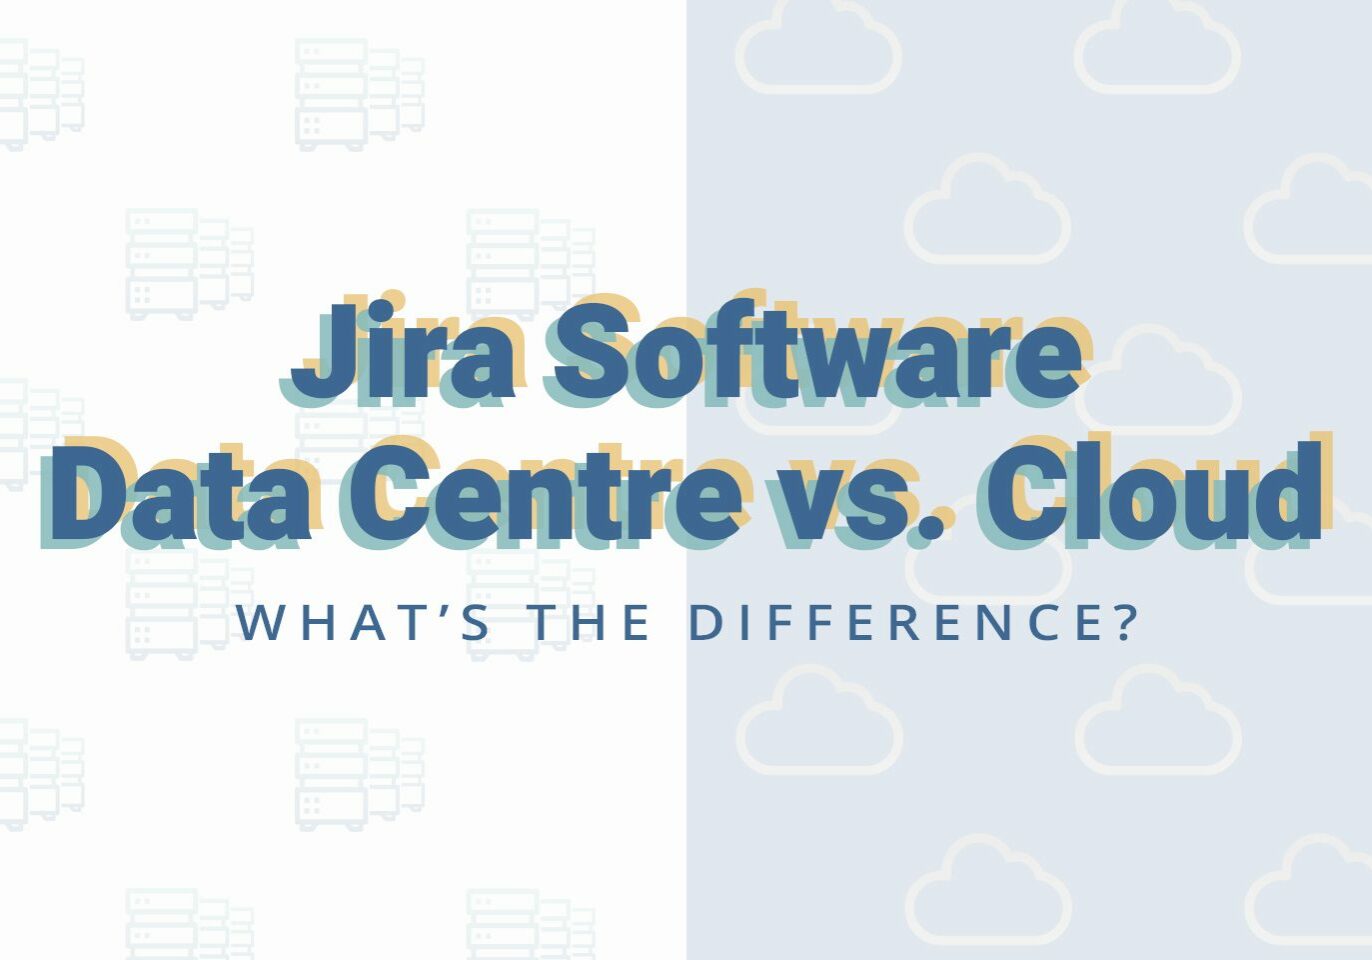 Jira Software Data Centre vs Cloud: What's the difference?